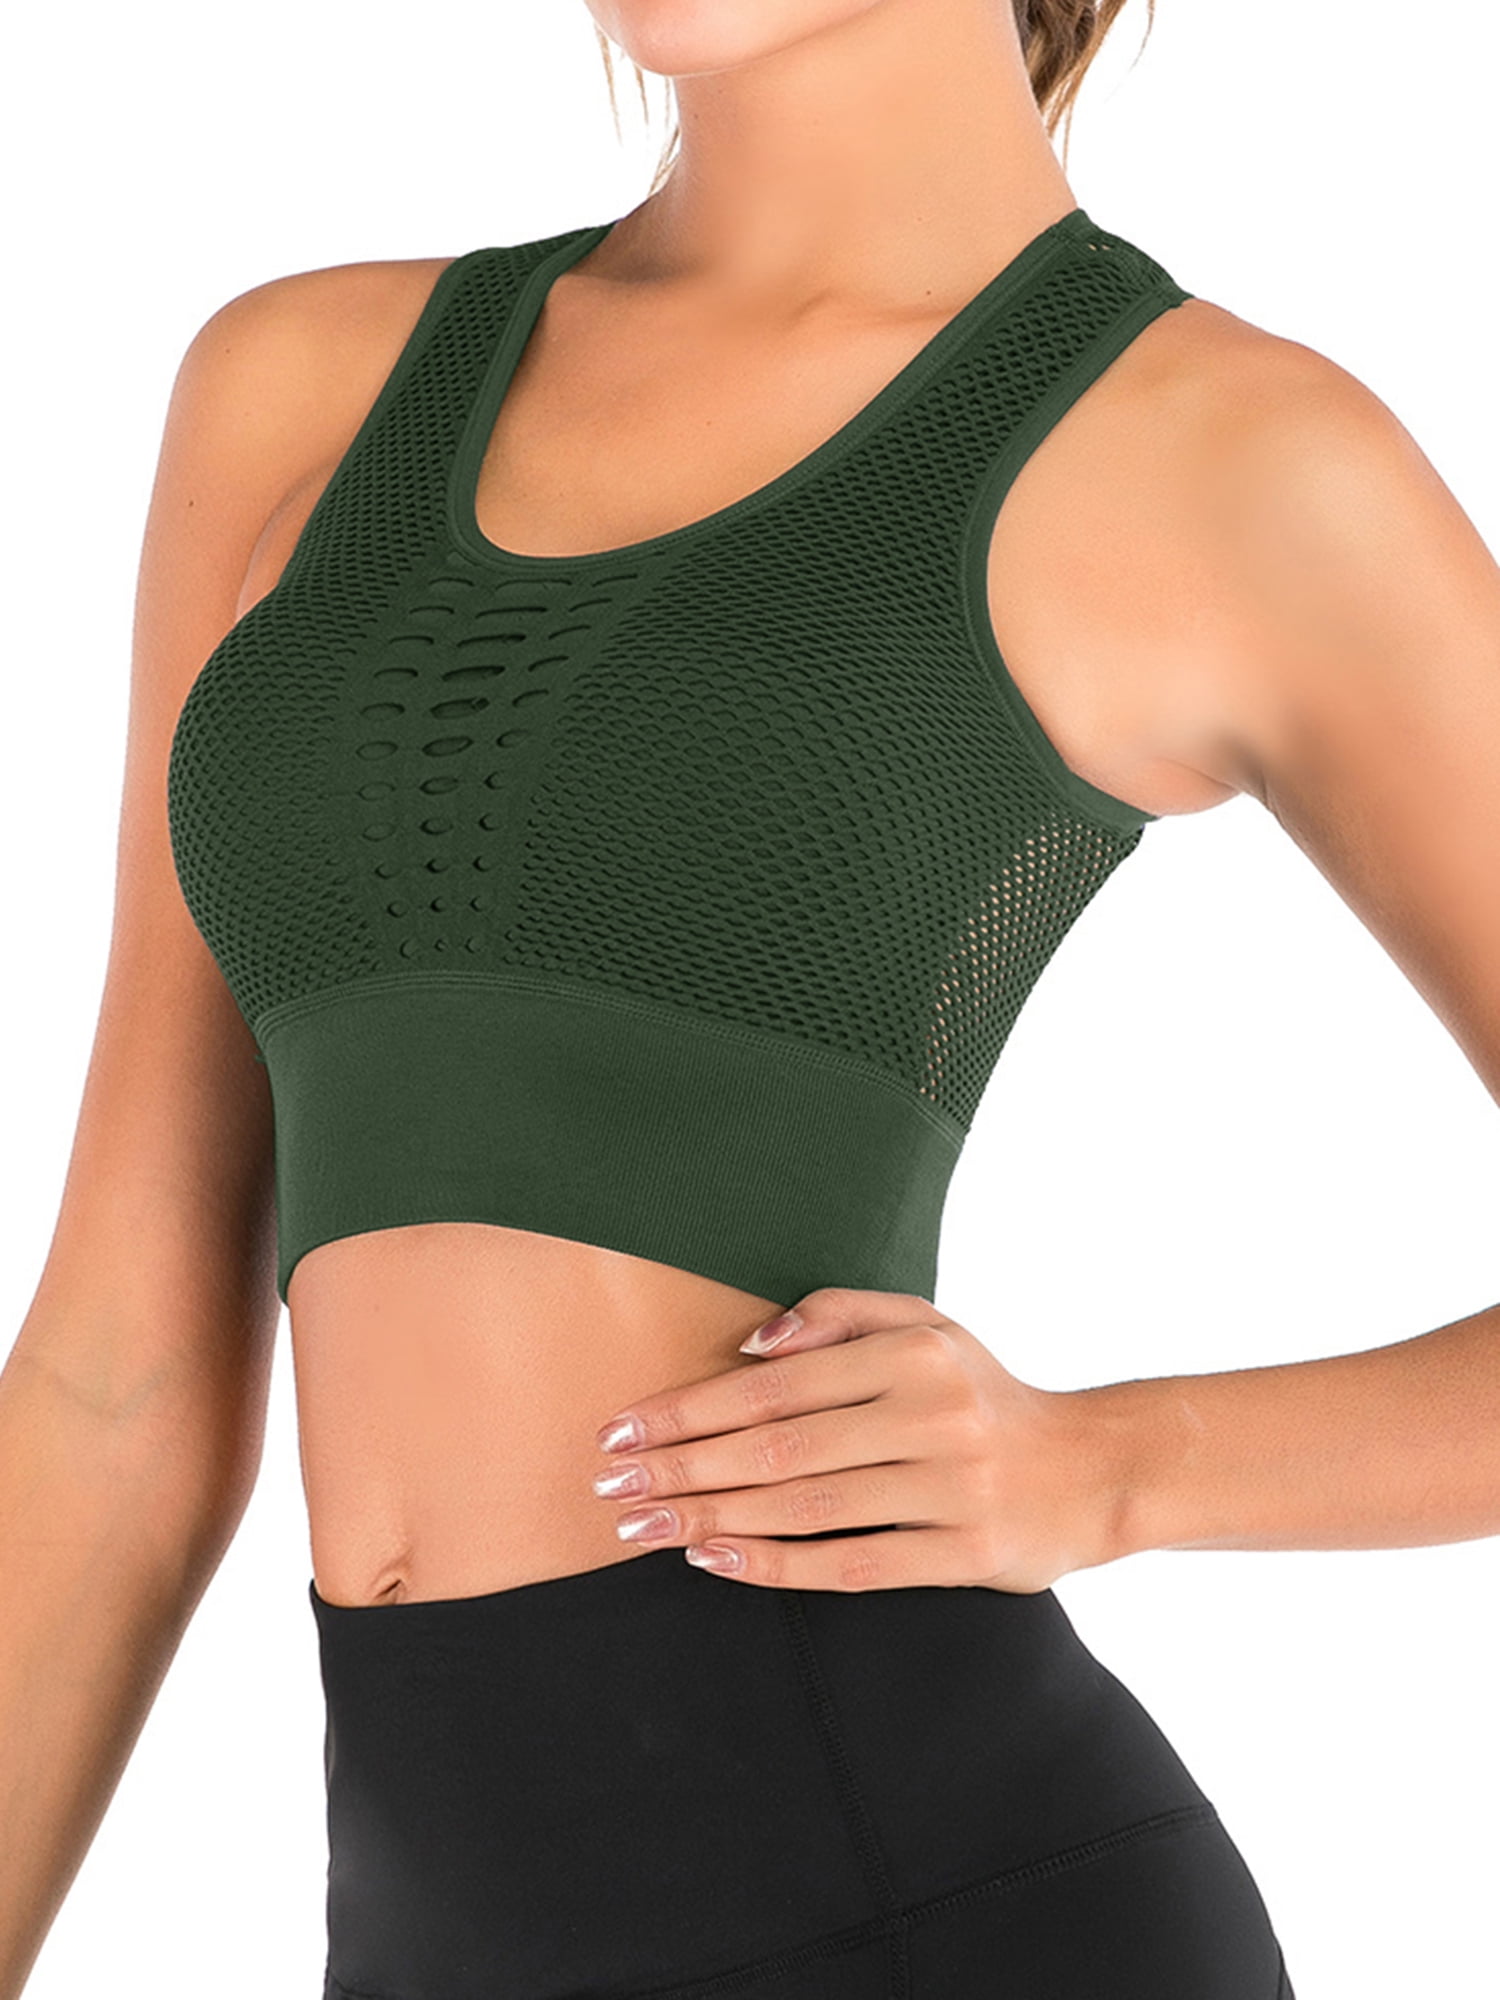 Women Bust Shaping Yoga Athletic Padded High Impact Workout Sports Bra Crop Tank Top